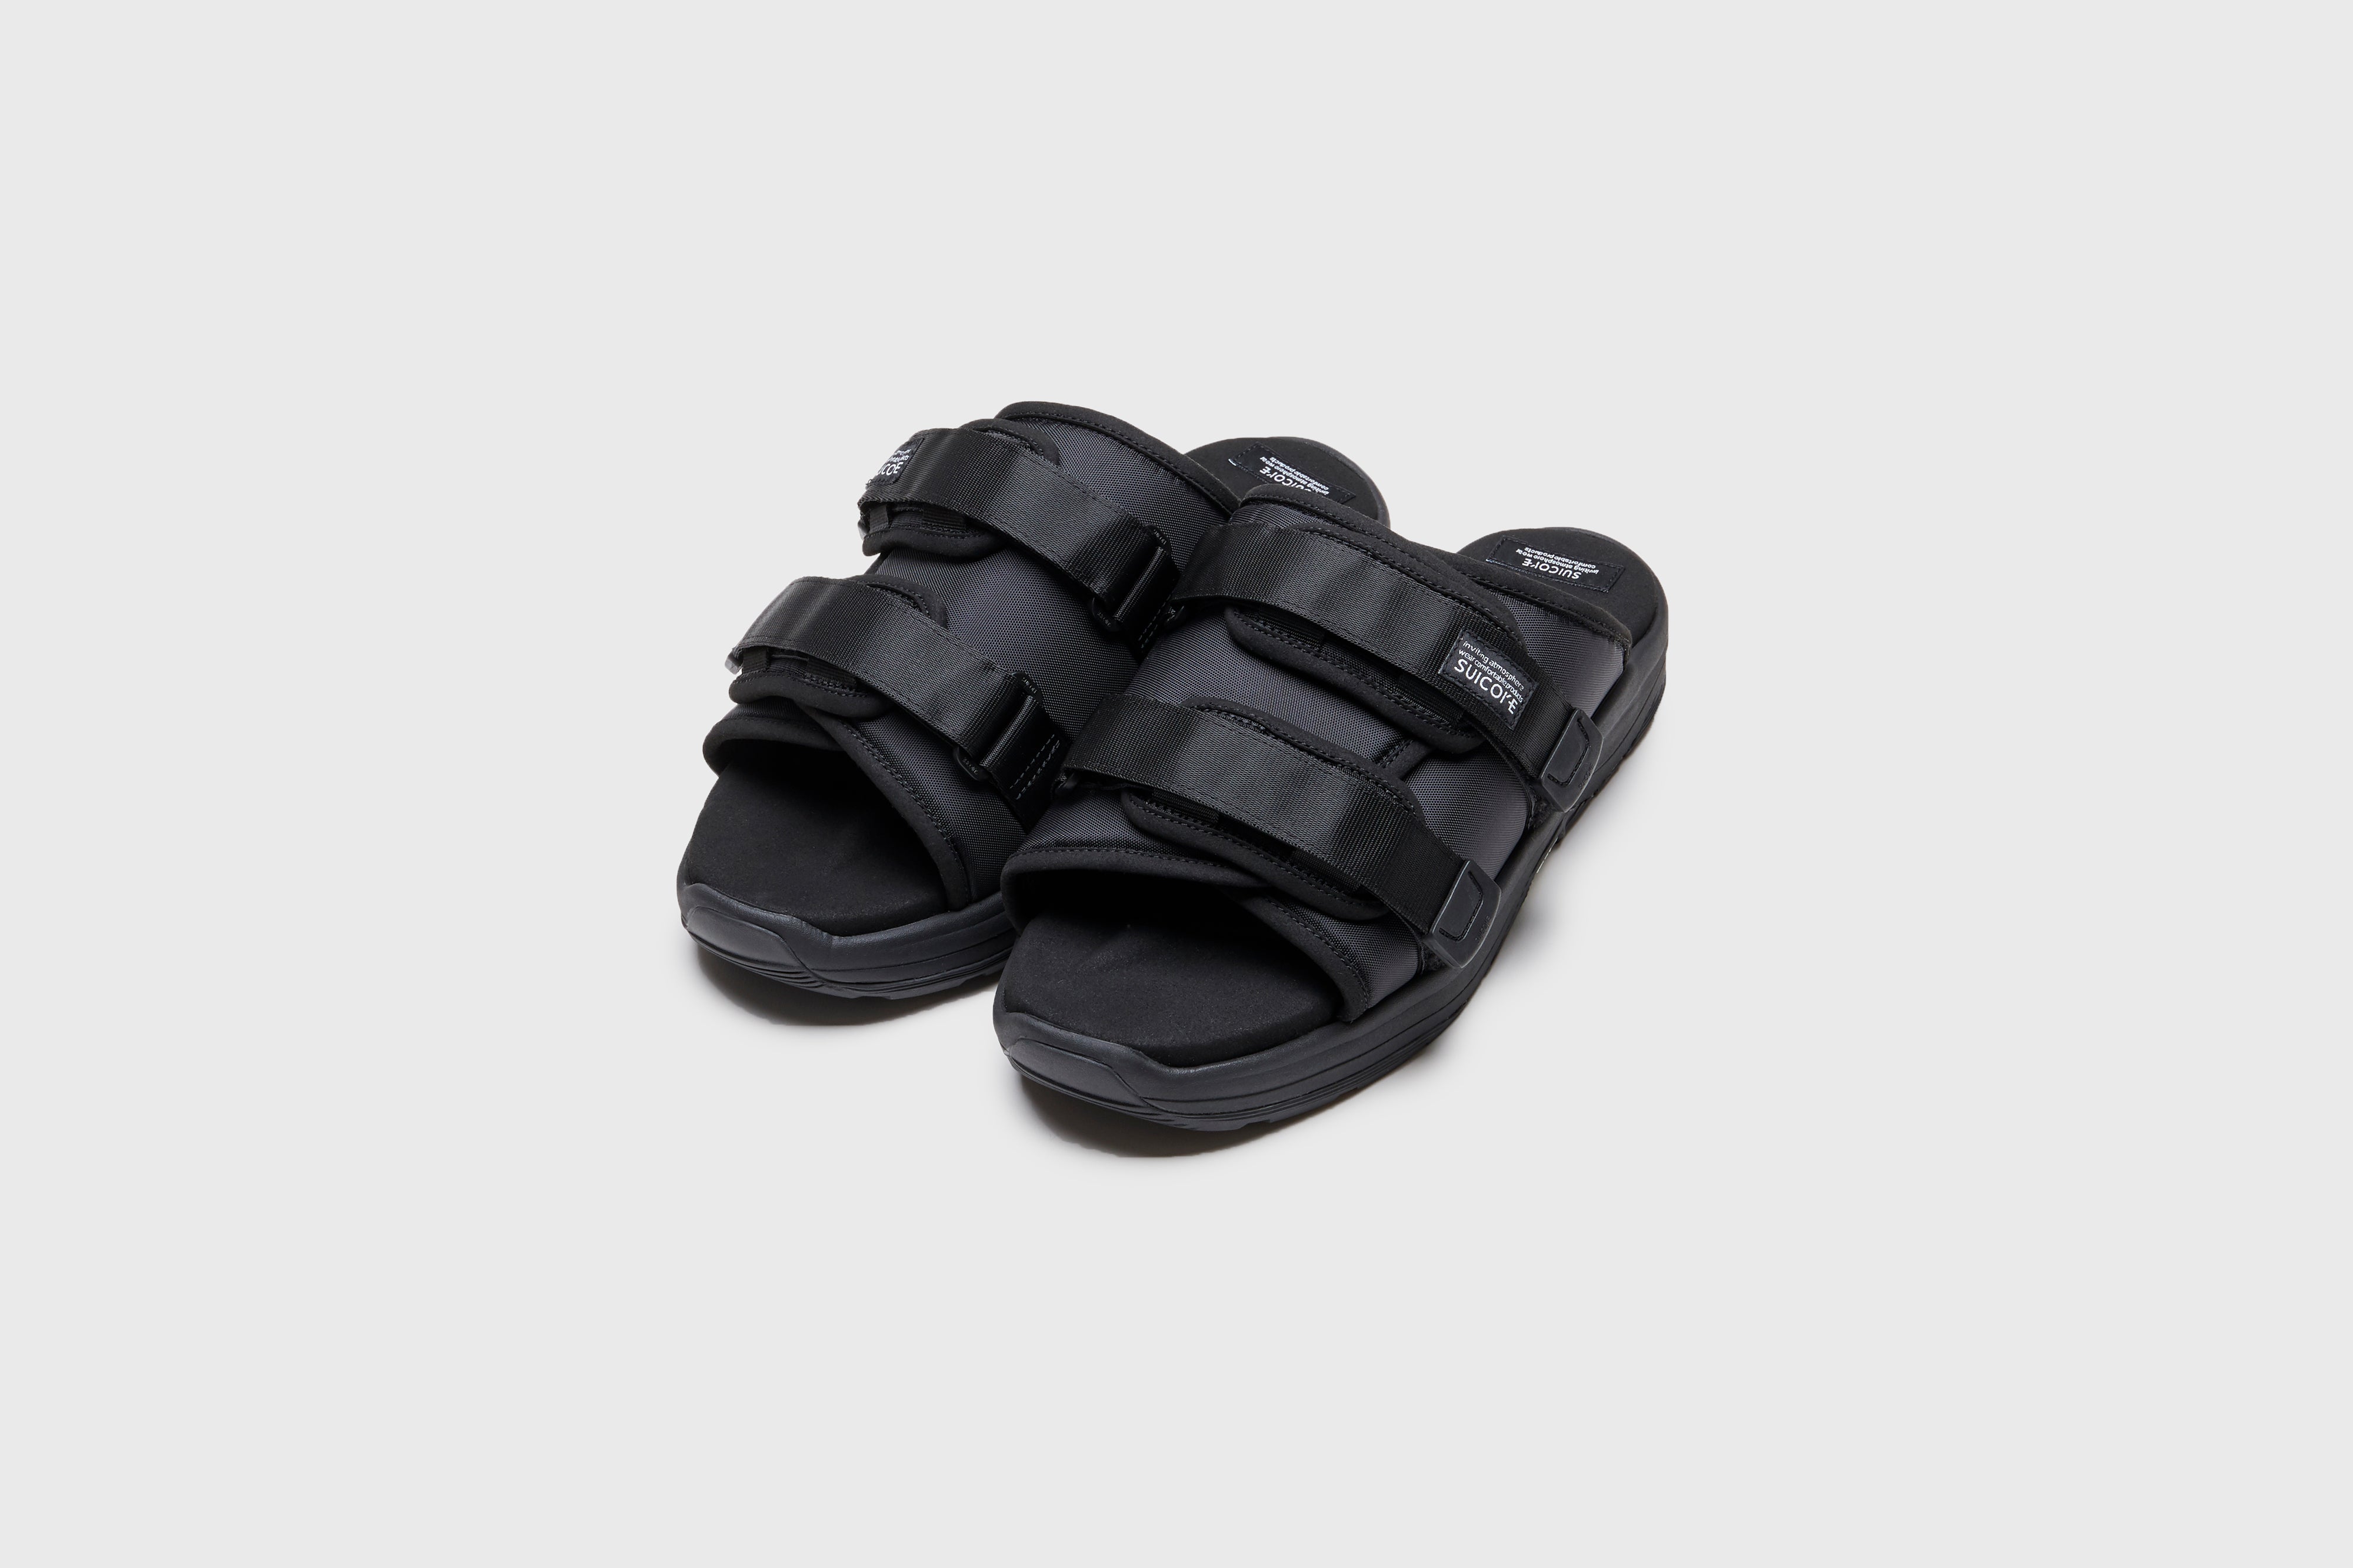 SUICOKE MOTO-Run slides with black nylon upper, black midsole and sole, strap and logo patch. From Spring/Summer 2023 collection on eightywingold Web Store, an official partner of SUICOKE. OG-332 BLACK